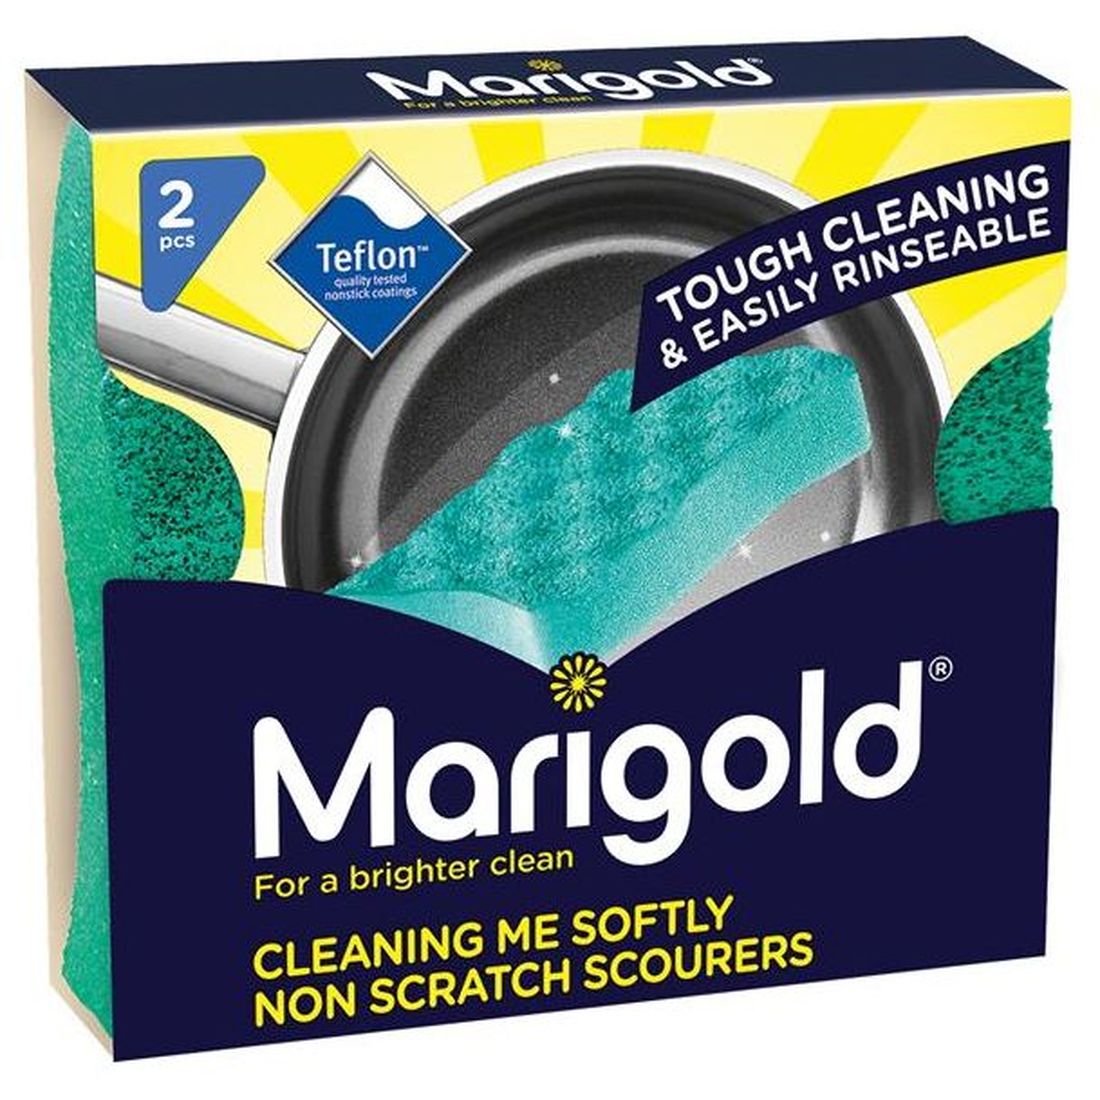 Marigold Cleaning Me Softly Non-Scratch Scourers x 2 (Box 14)                            